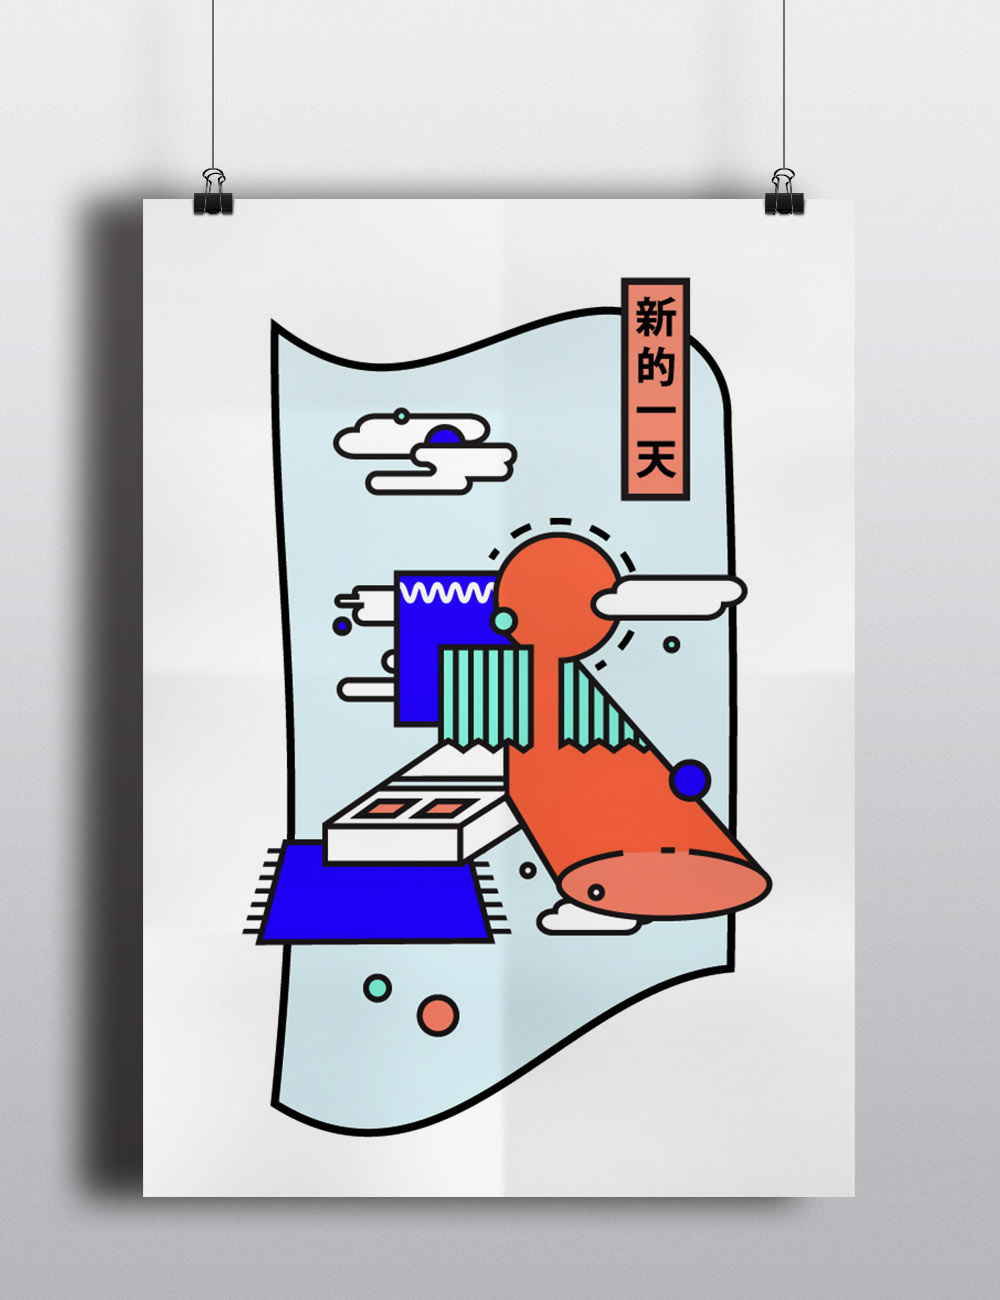 MORNING new day bright colorful simple geometric clear shirt poster Poster Design chinese 타이포그래피 포스터 タイポグラフィー ポスター